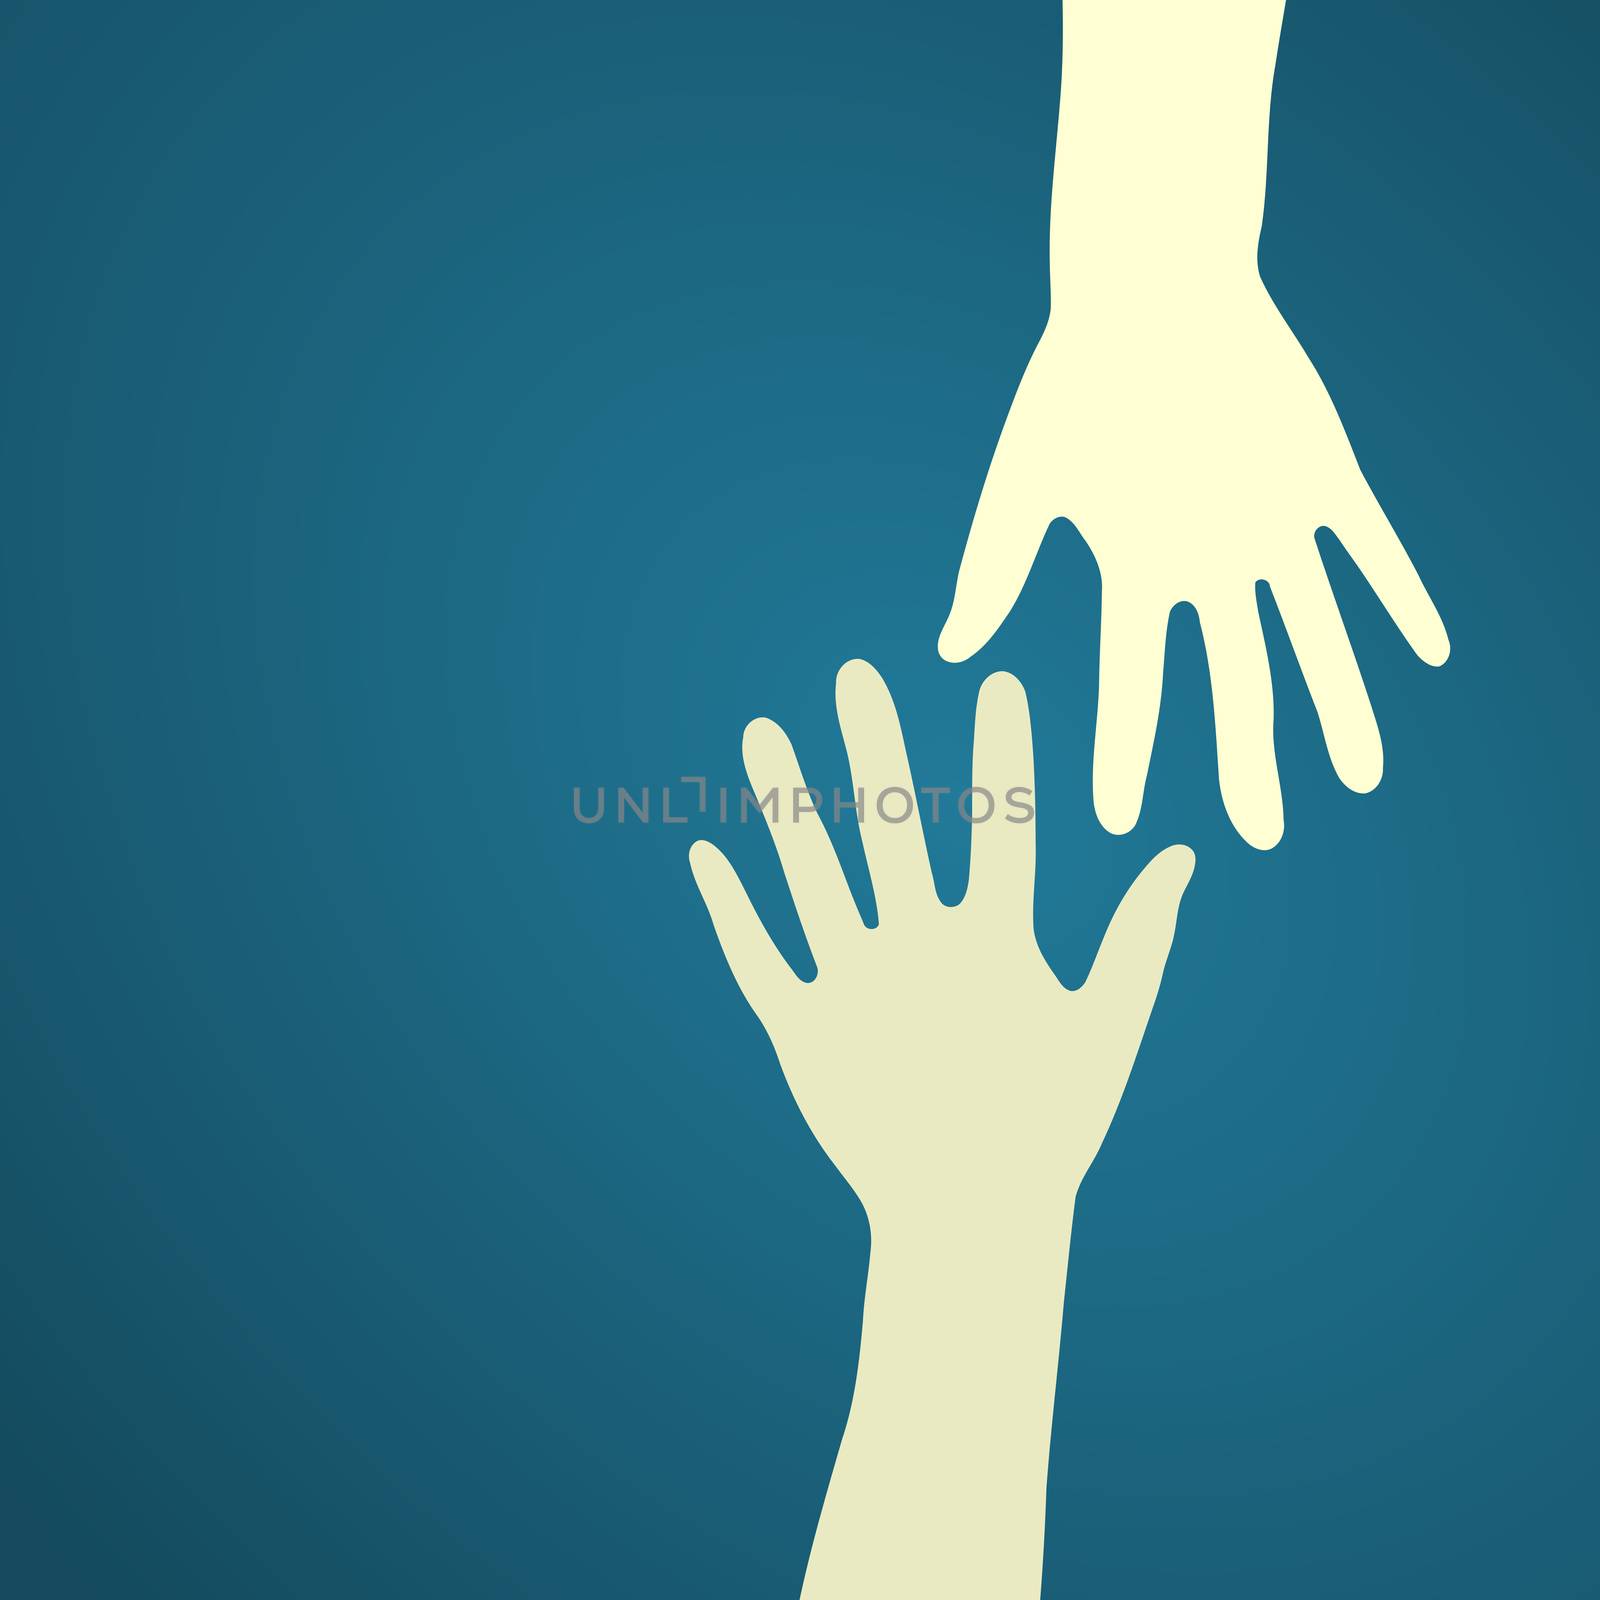 An illustration of reaching out to give a helping hand